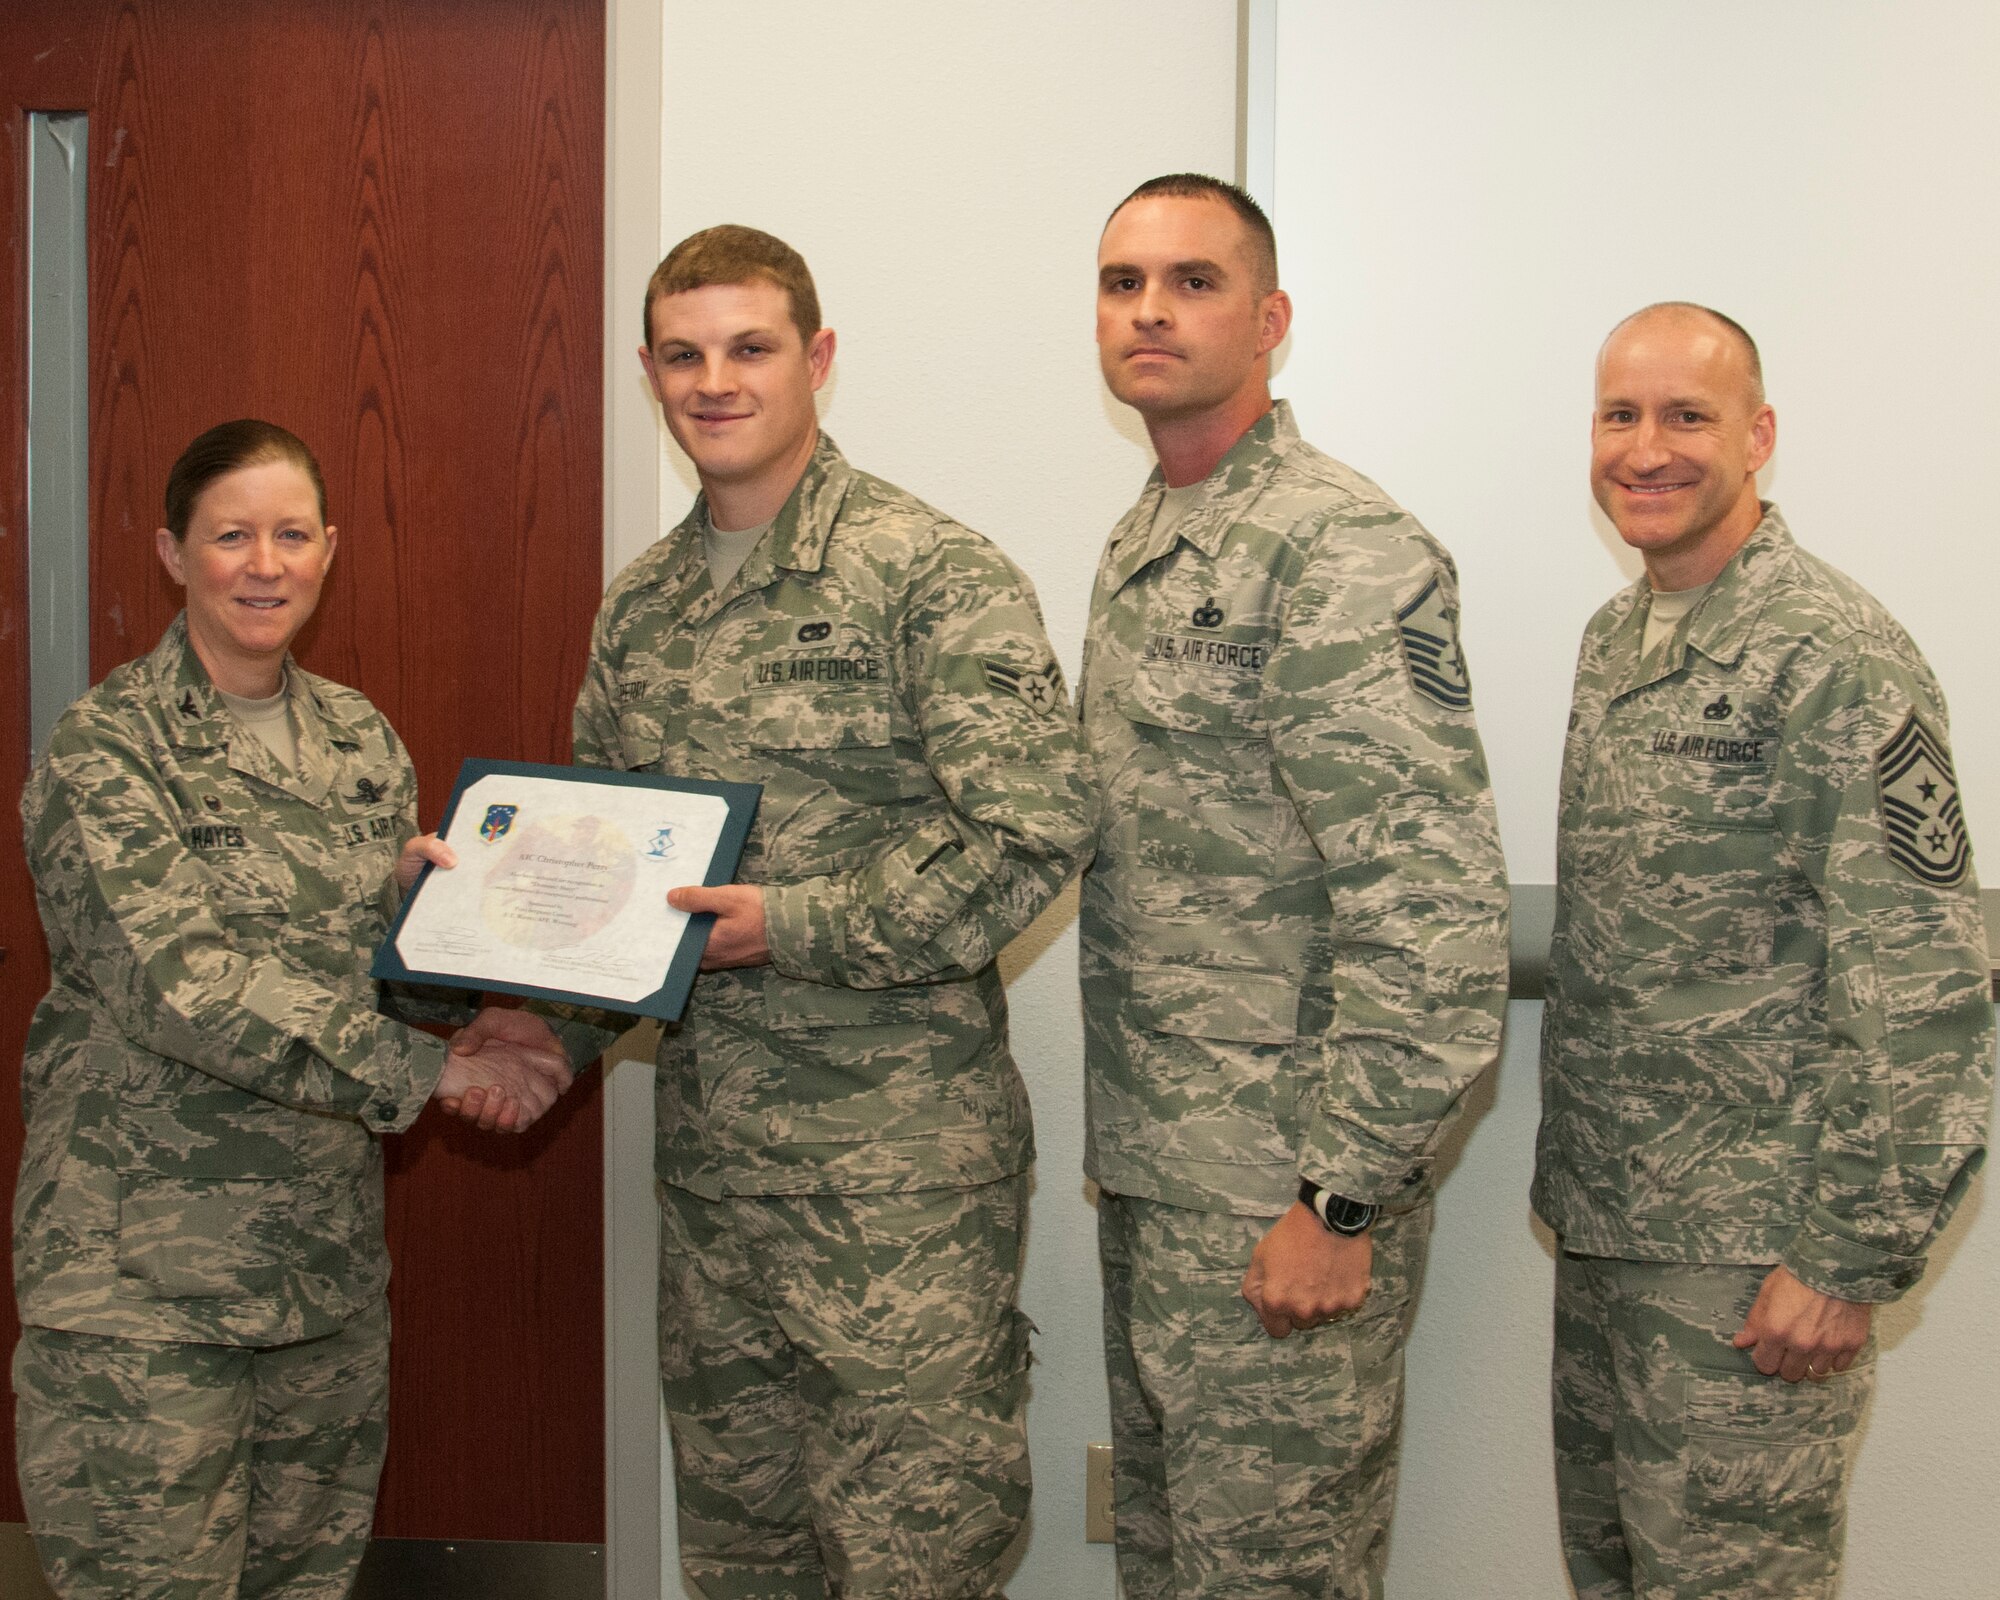 Airman 1st Class Christopher Perry, 90th Logistics Readiness Squadron vehicles and vehicle maintenance technician, poses with Col. Tracey Hayes, 90th Missile Wing commander; Master Sgt. Ricardo Borecki, 90th Logistics Readiness Squadron first sergeant; and Chief Master Sgt. Samuel Couch, 90th MW command chief, during the wing's first sergeants' Diamond Sharp Award presentation May 12, 2015, on F.E. Warren Air Force Base, Wyo. First sergeants nominate an Airman in their respective squadrons for the award, and the first sergeants select the three top contenders for the award each month. (U.S. Air Force photo by Senior Airman Jason Wiese)